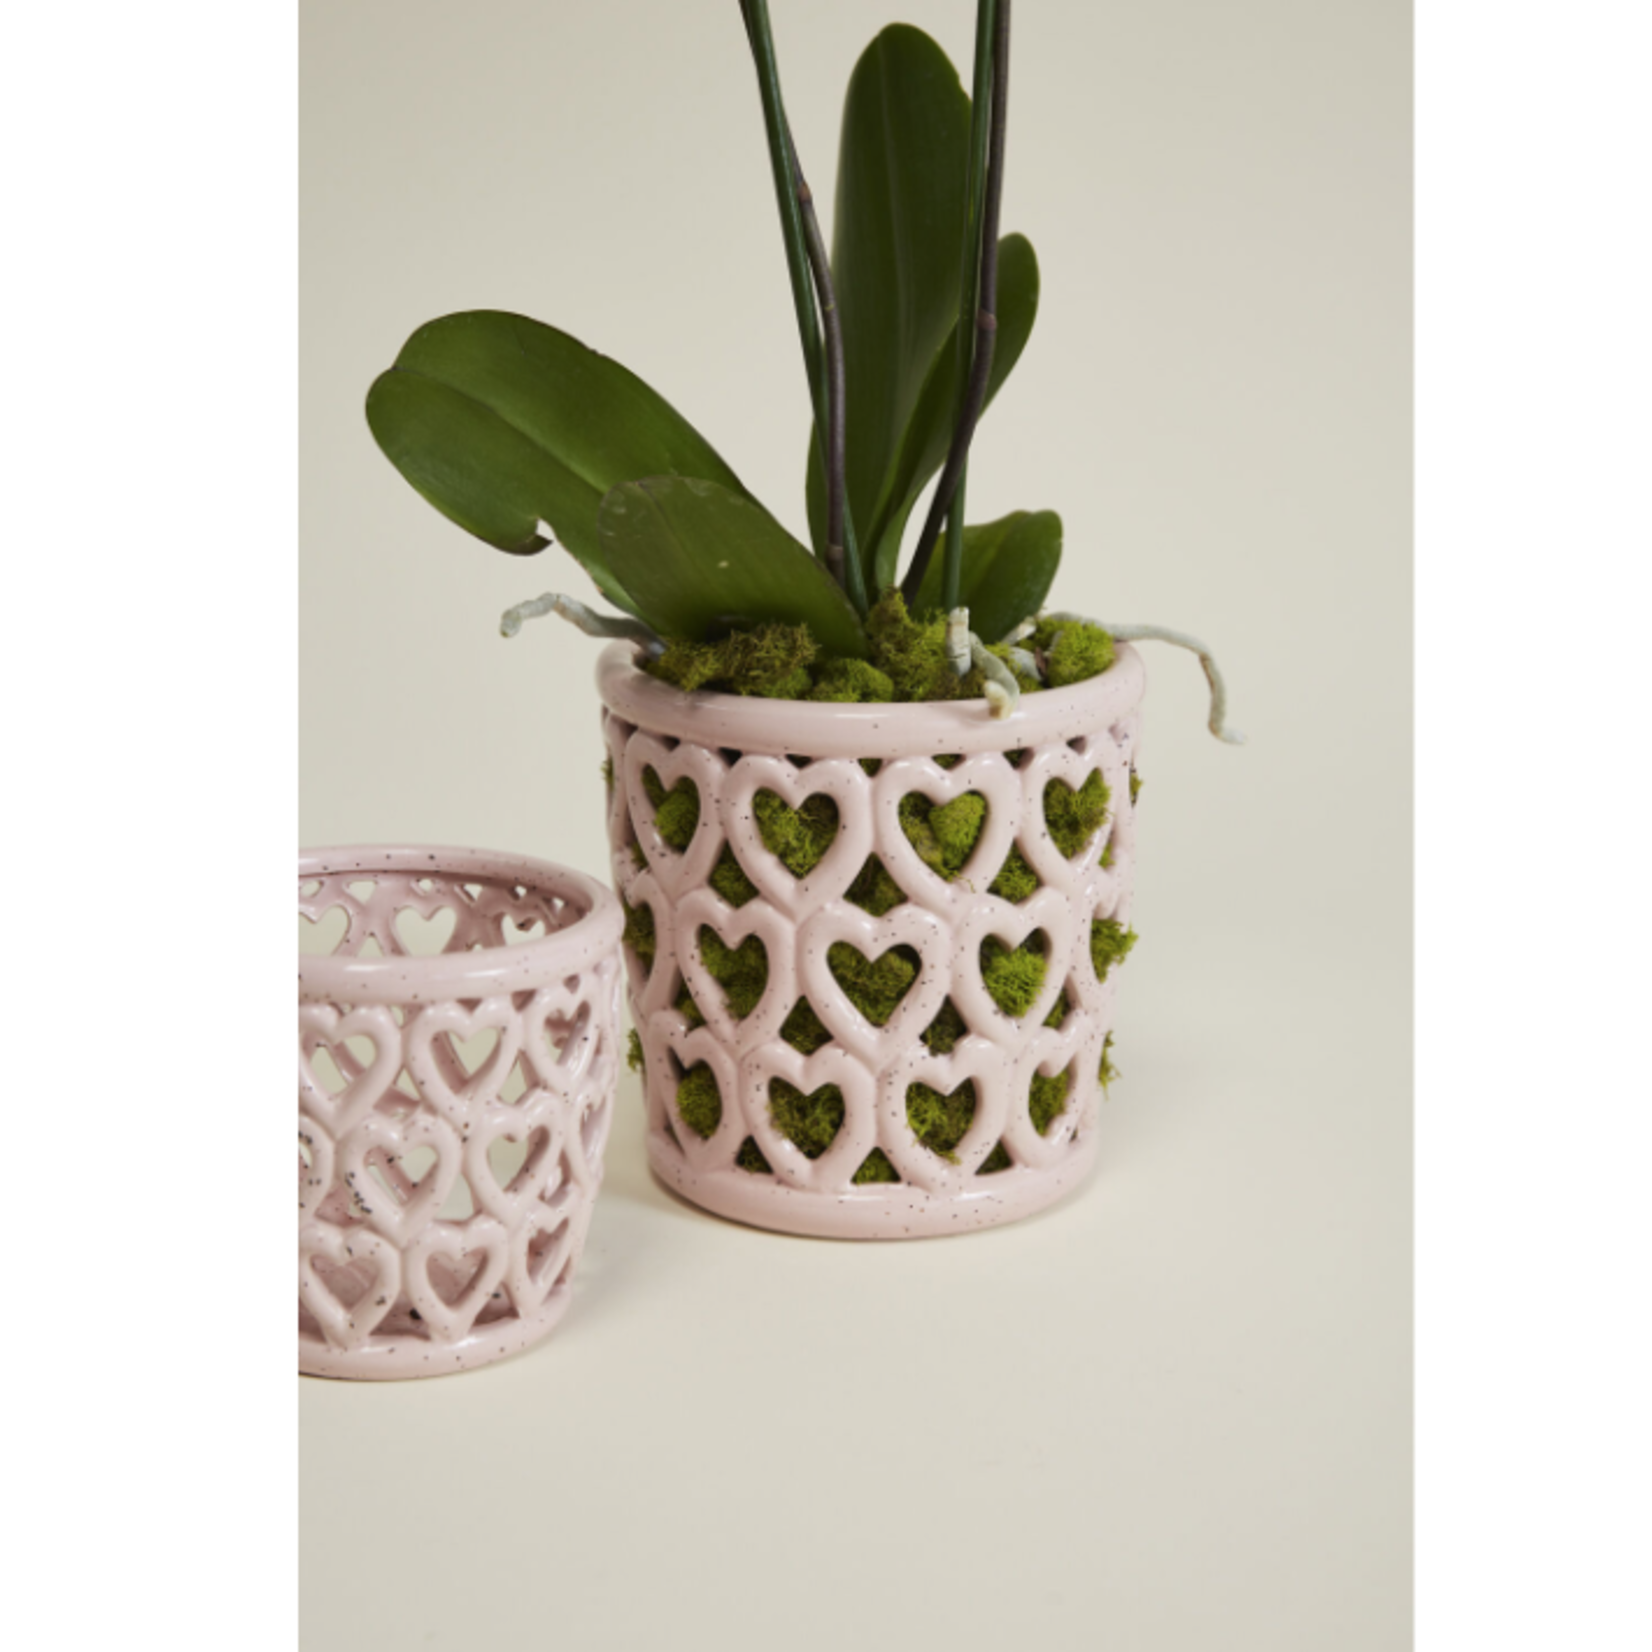 40% off was $23.50 now $14.09. 7” X 7” PINK CERAMIC CHERISHED HEARTS ORCHID POT